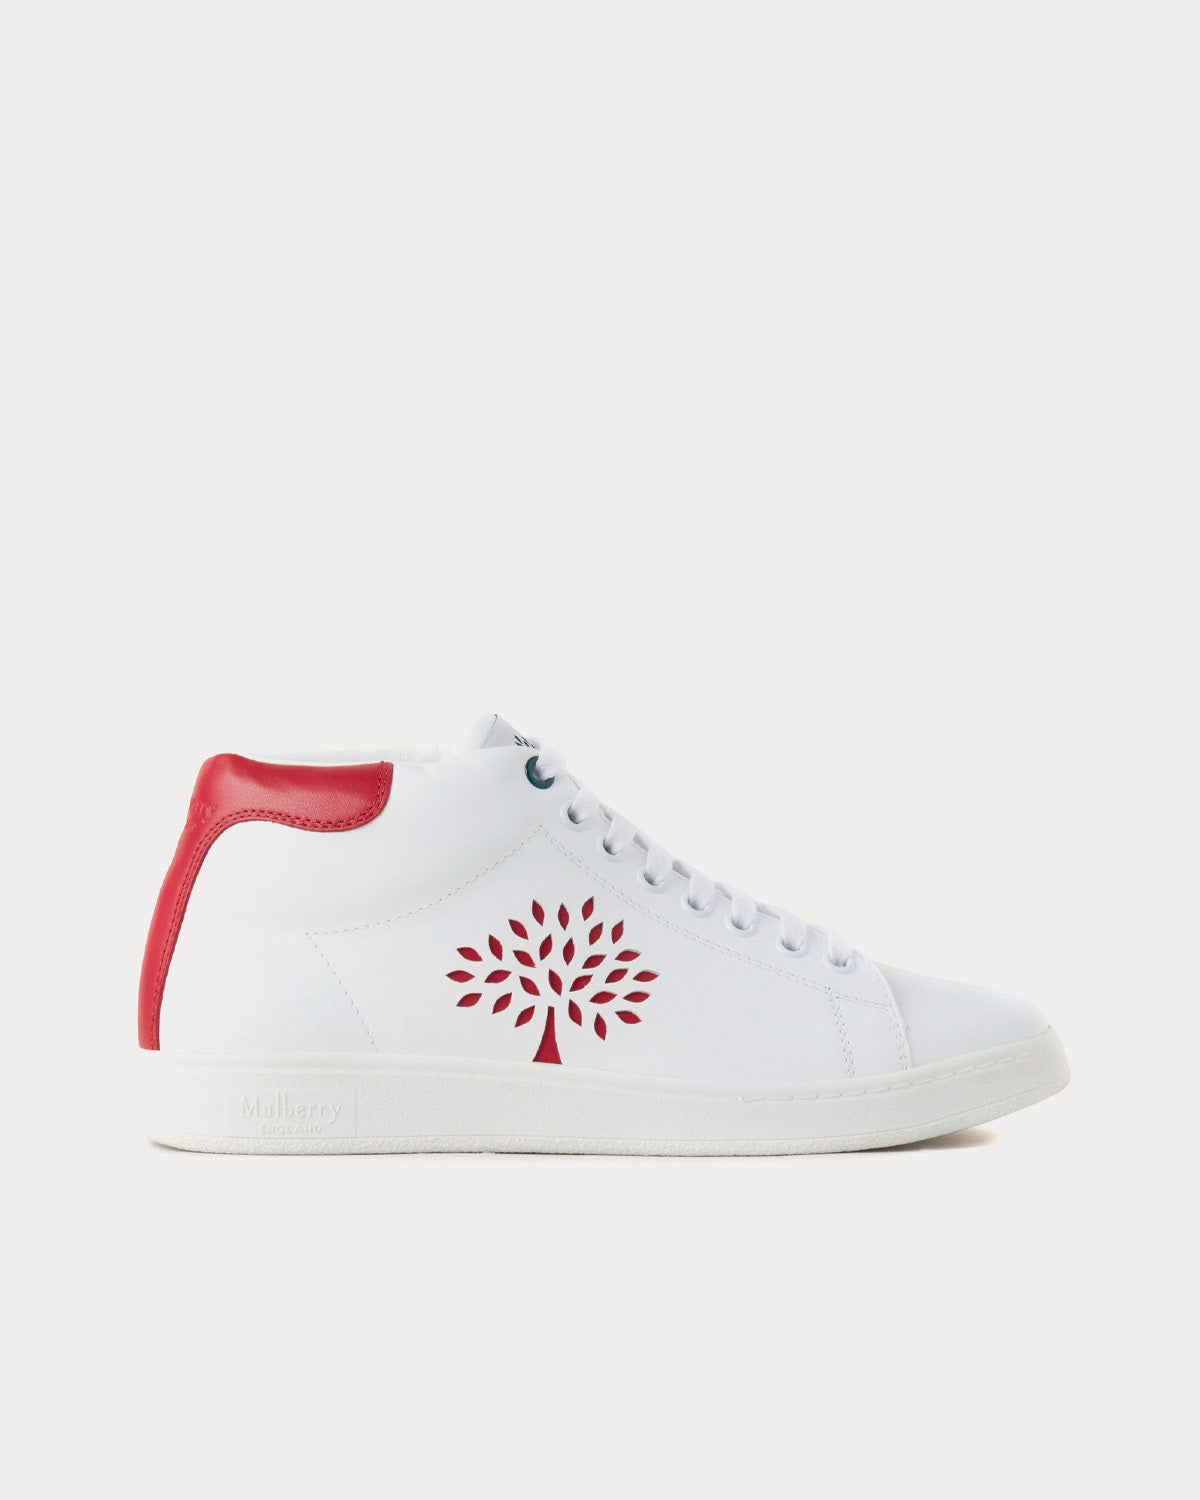 Mulberry - Tree Tennis Leather Lancaster Red High Top Sneakers